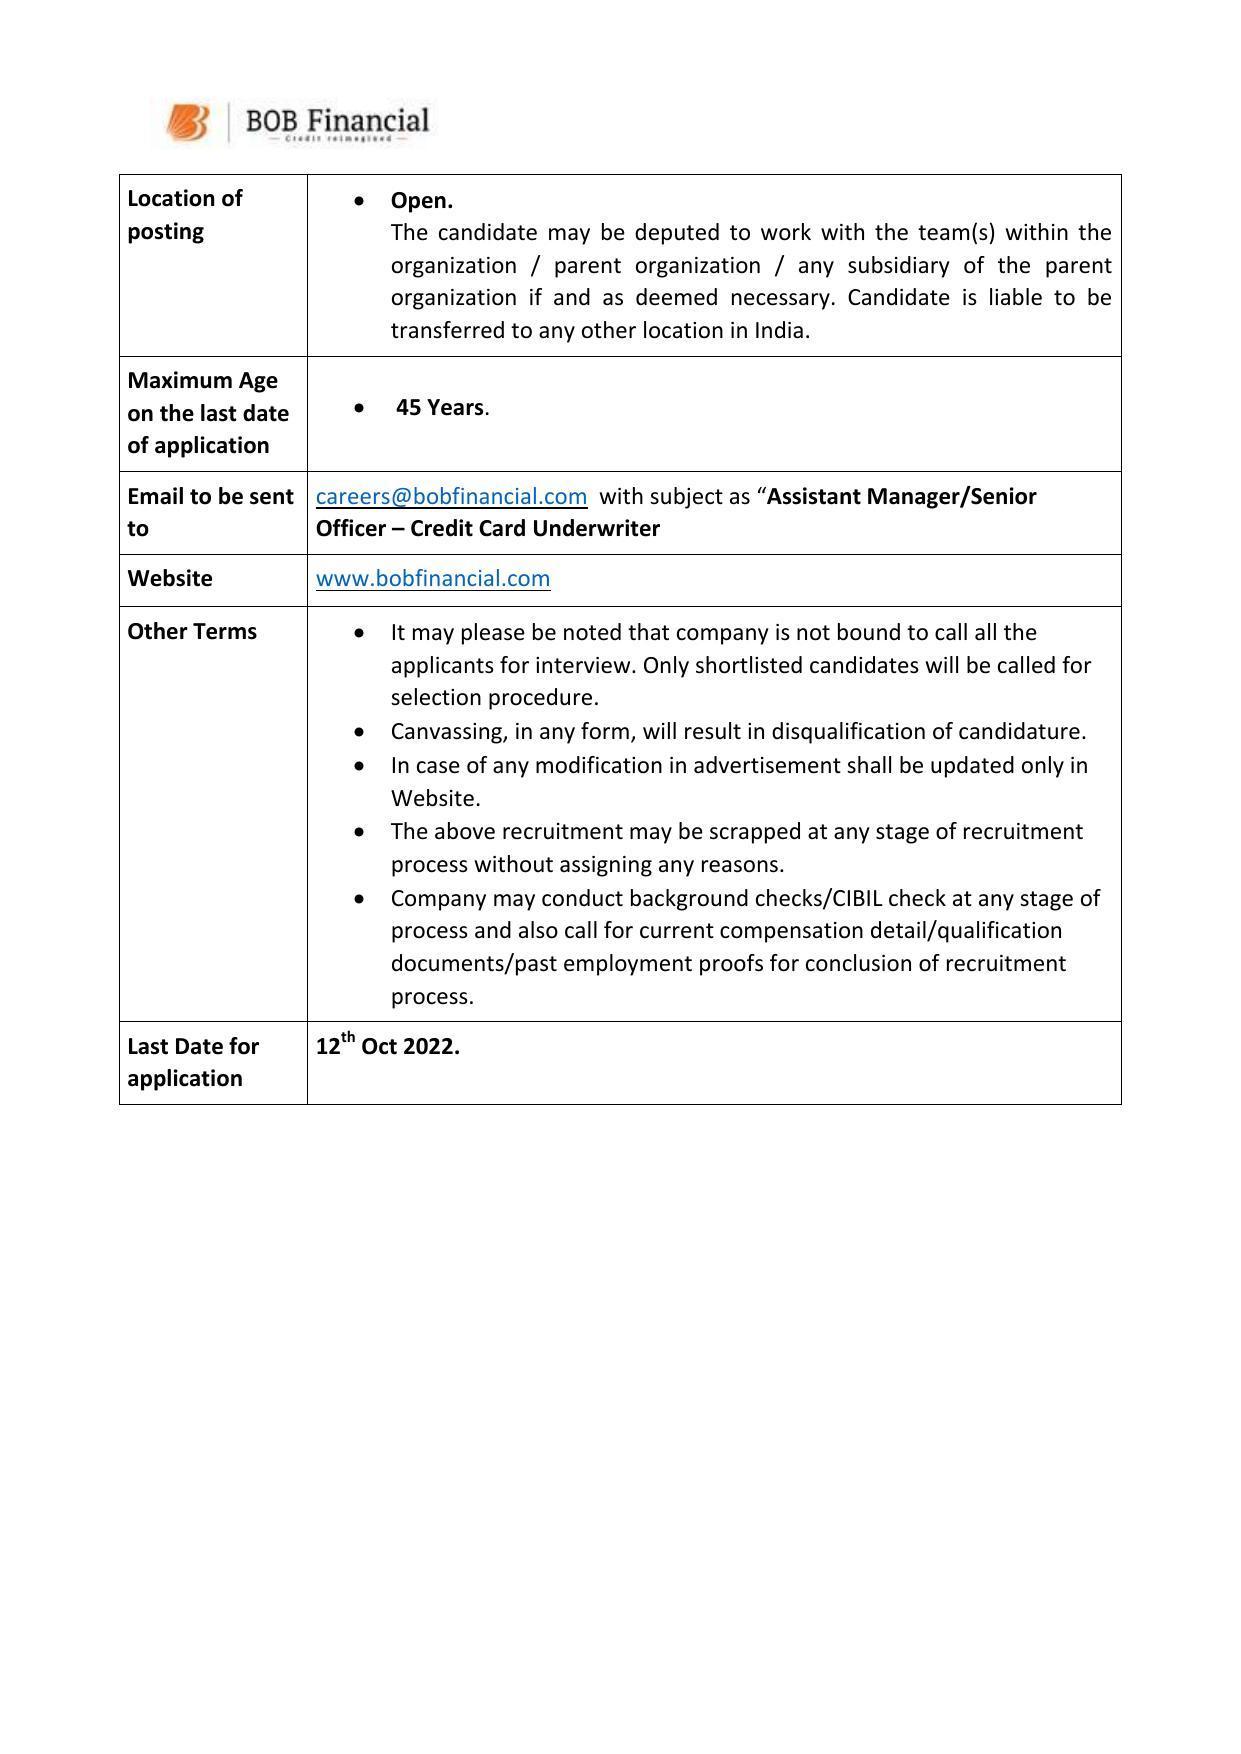 BOB Financial Invites Application for Assistant Manager/ Senior Officer Recruitment 2022 - Page 1